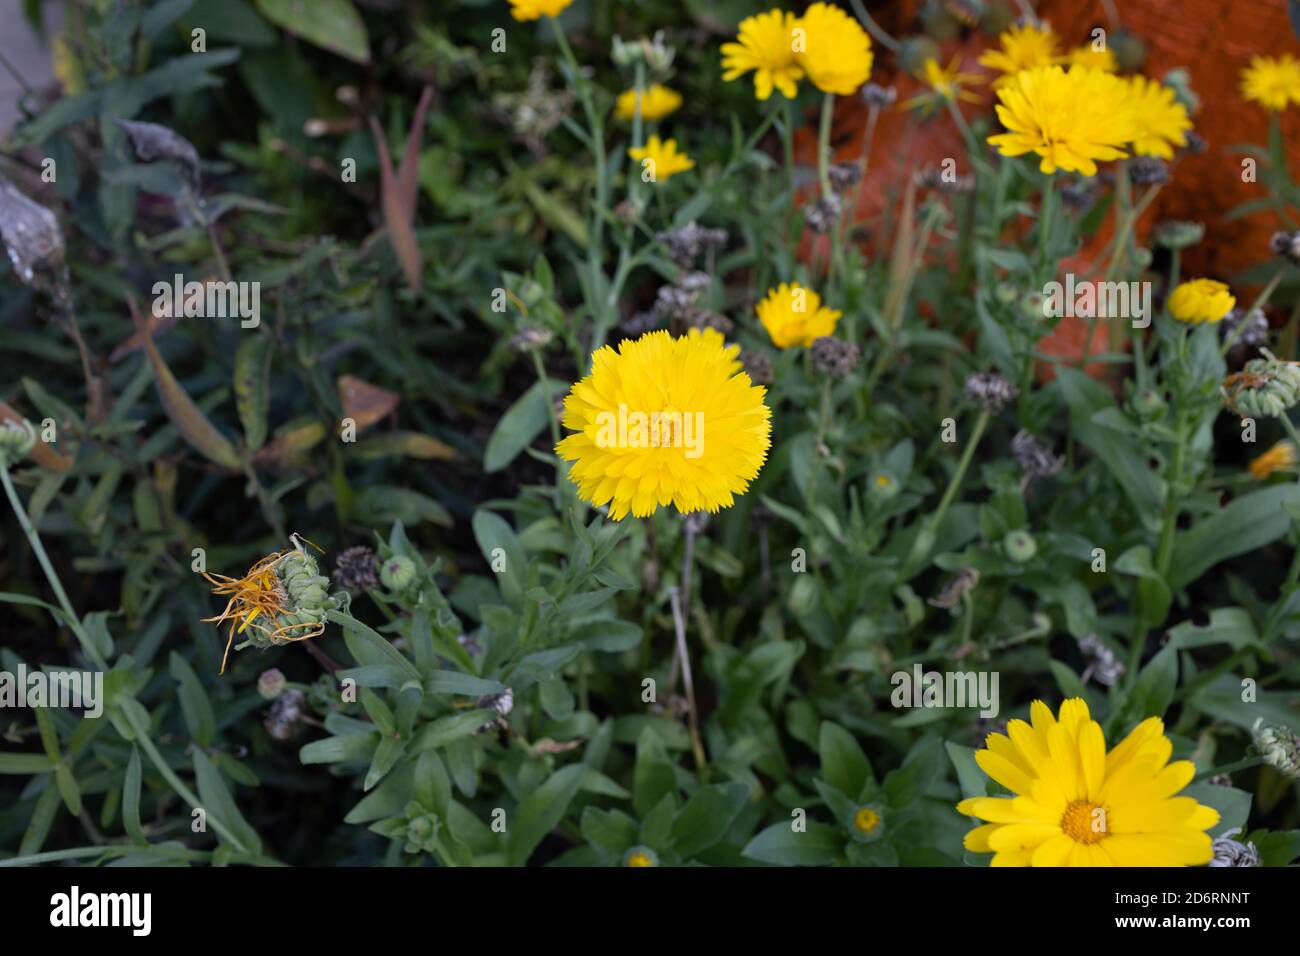 several yellow chrysanthemums just starting to bloom in the garden Stock Photo